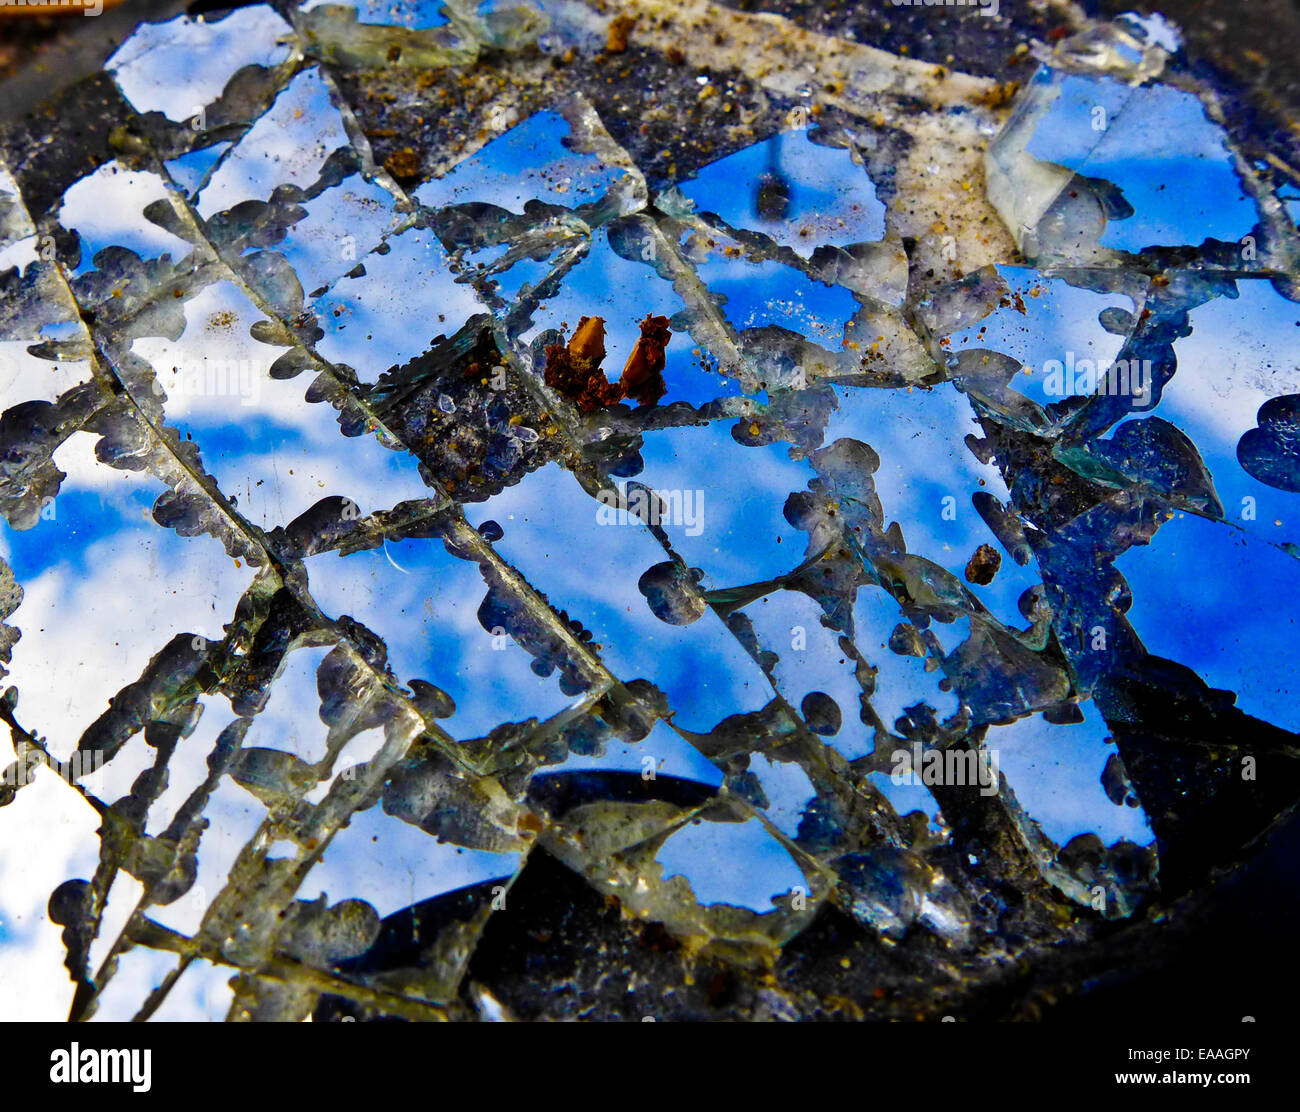 A car wing mirror lies shattered in the road reflecting the blue sky and clouds above. Stock Photo